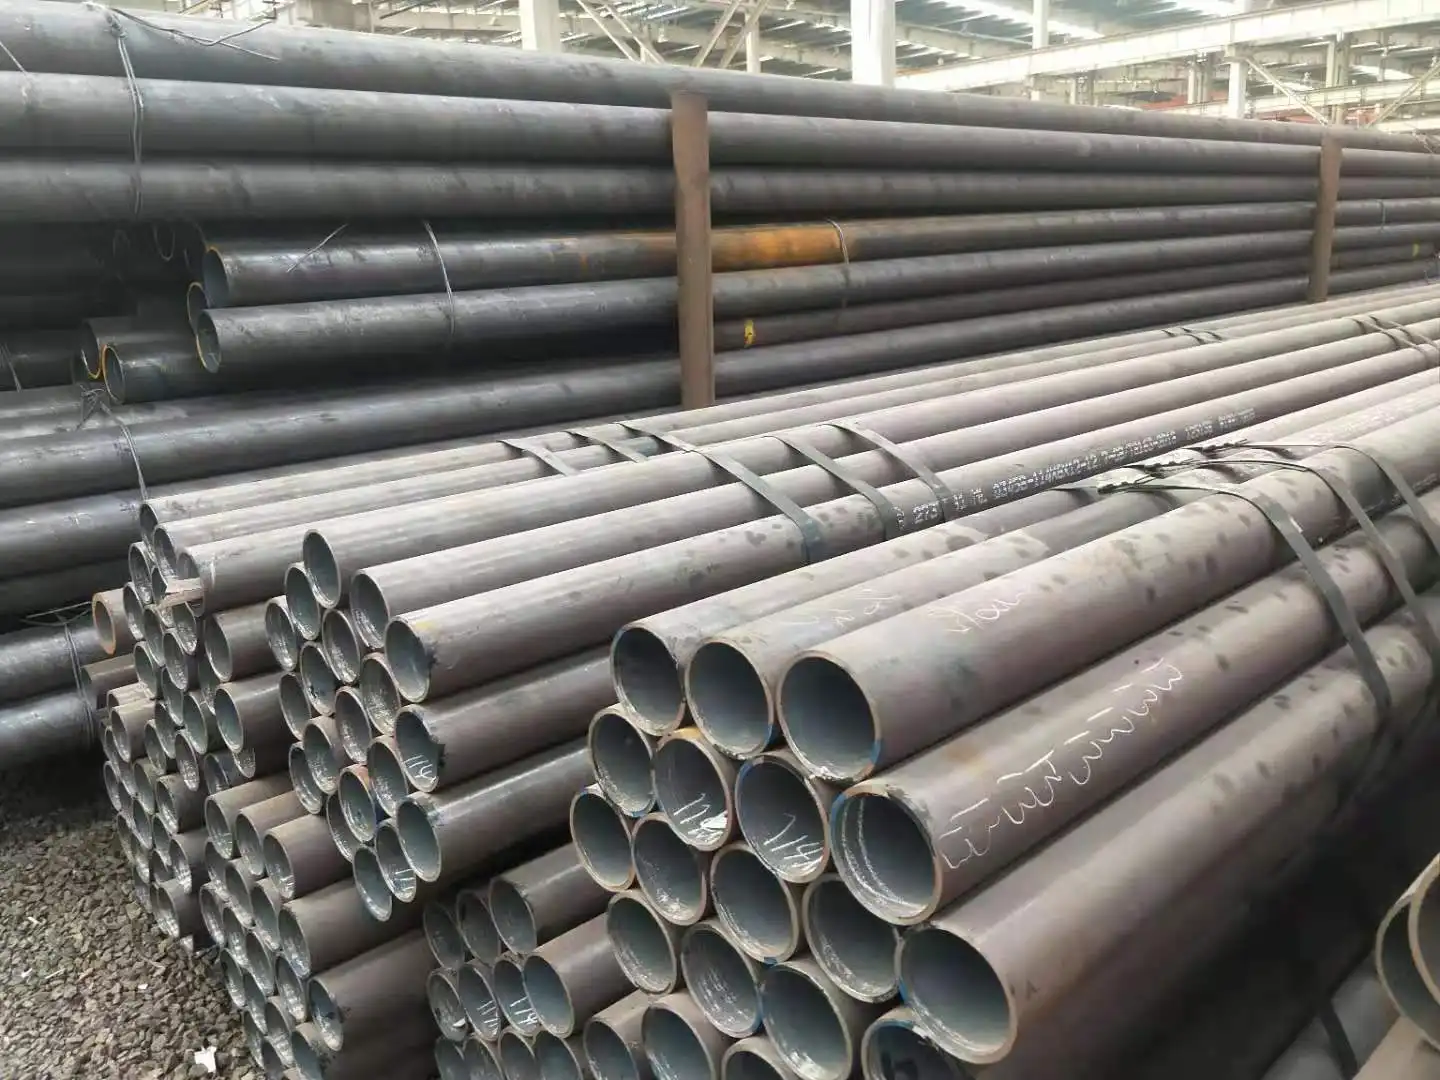 Steel prices generally fall